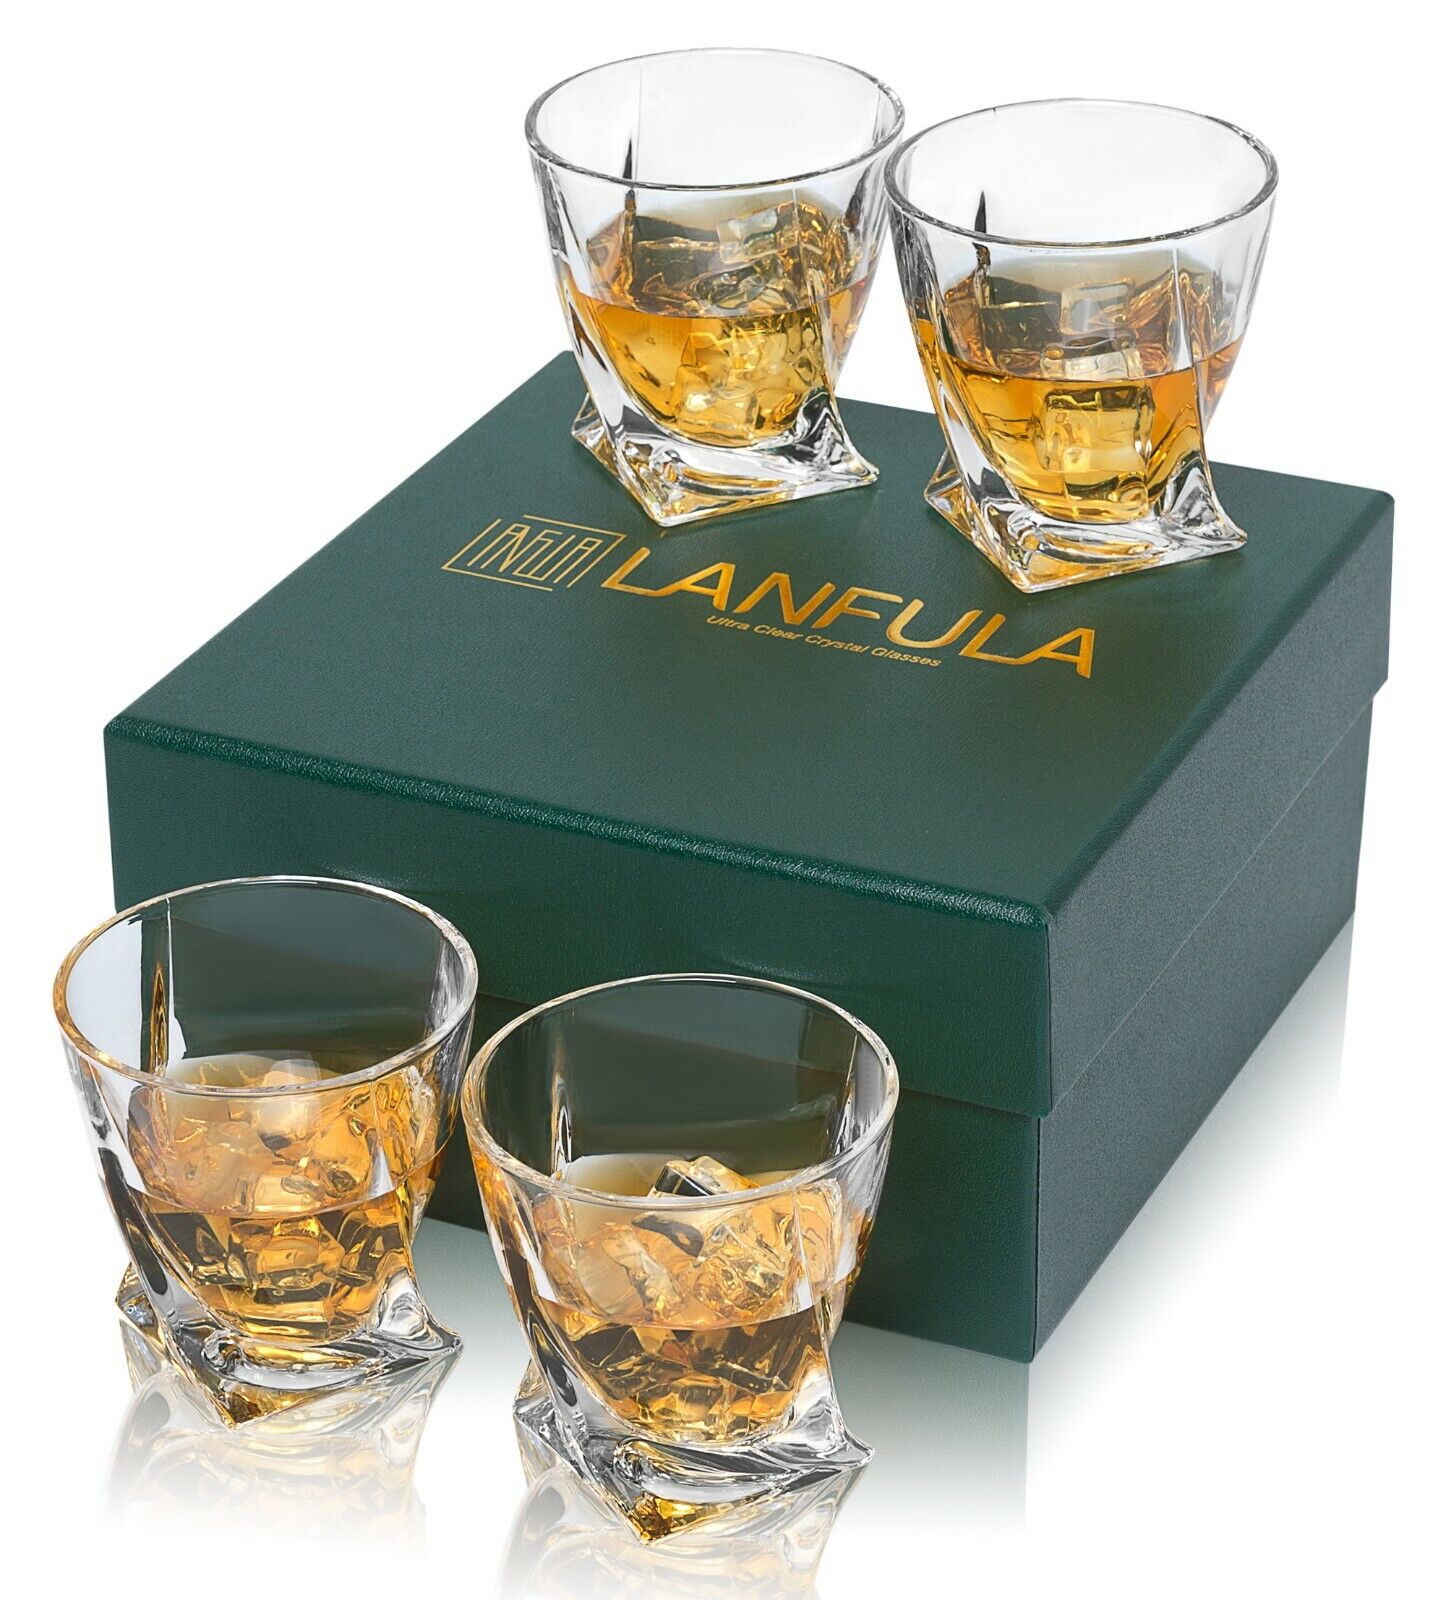 10 Oz Scotch Glasses Set of 4 Crystal Whiskey Tumbler Cups Home Bar Glassware